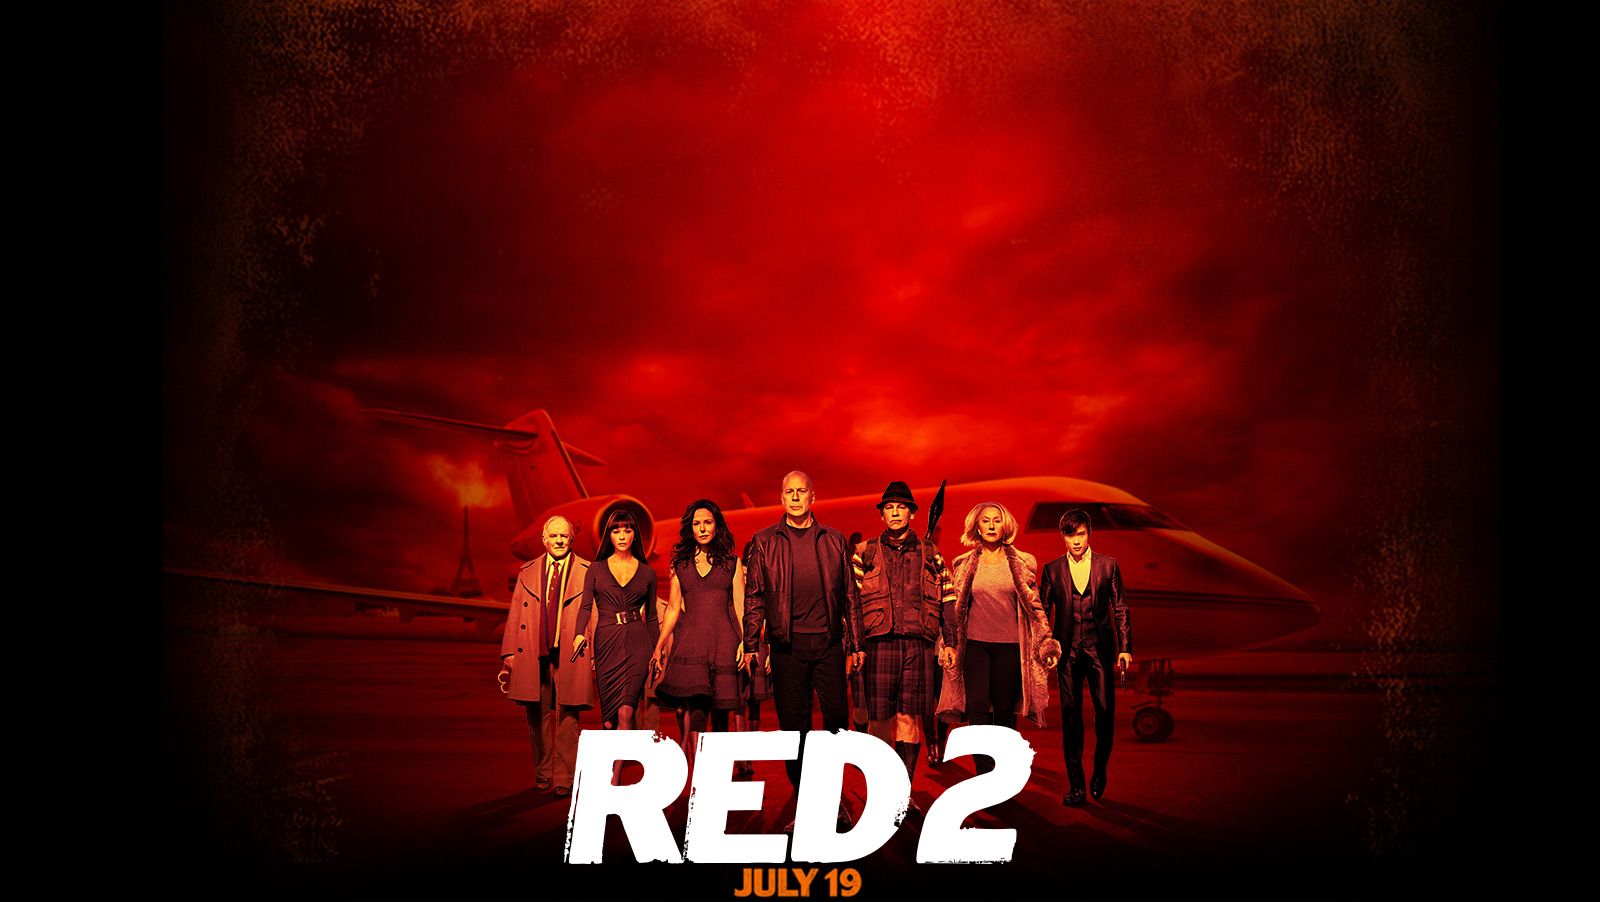 Free download Red 2 Movie Background Wallpaper Red 2 Movie Wallpaper Image [1600x902] for your Desktop, Mobile & Tablet. Explore Movie Screen Wallpaper. Broken TV Screen Wallpaper, Screen Picture